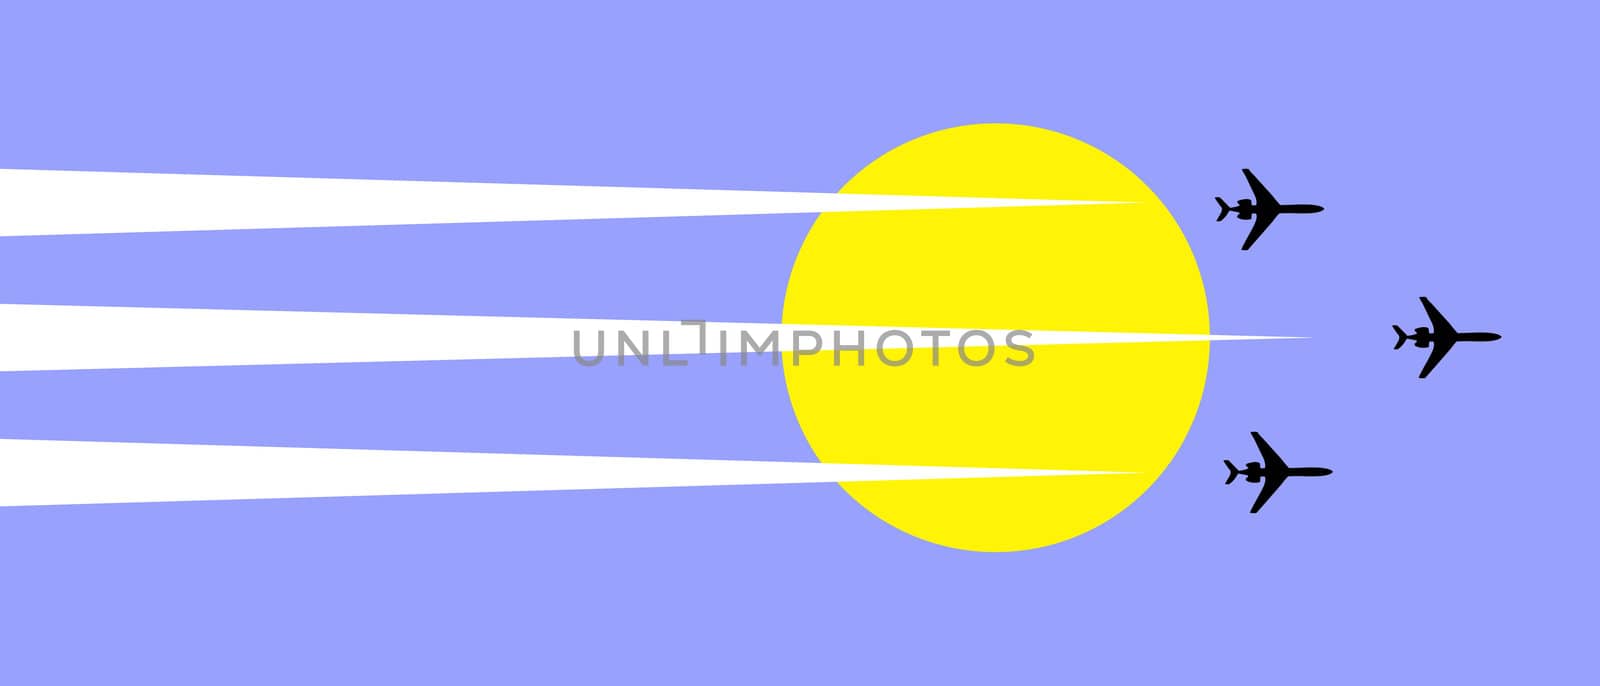 vector illustration plane in sky on background sun by basel101658